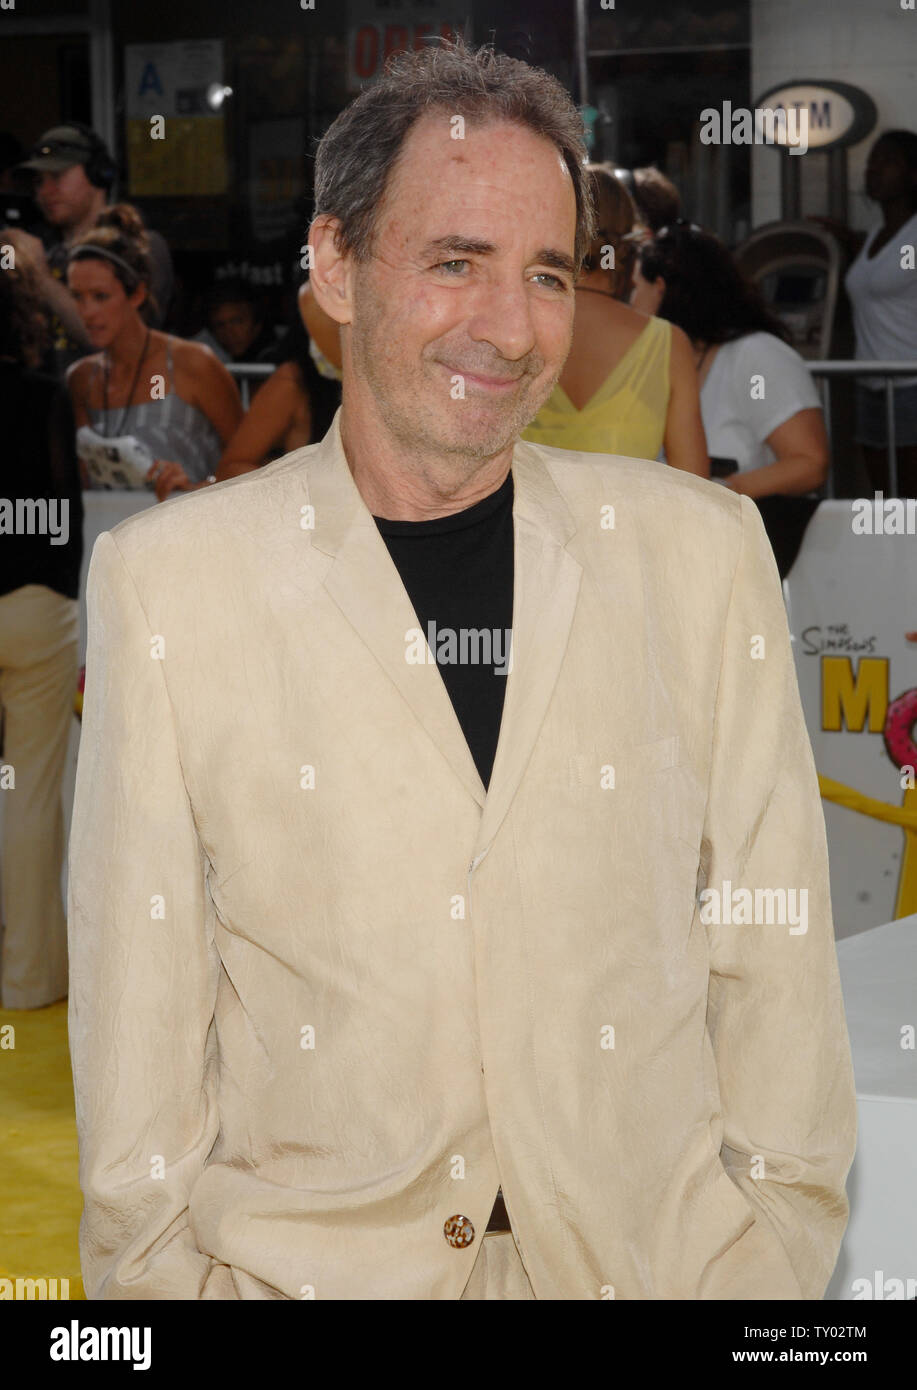 Harry Shearer, the voices including Mr. Burns, Ned Flanders, Principal Skinner, Rev. Lovejoy and President Arnold Schwarzenegger in the animated motion picture comedy 'The Simpsons Movie,' arrives at the premiere of the film in the Westwood section of Los Angeles on July 24, 2007. (UPI Photo/Jim Ruymen) Stock Photo